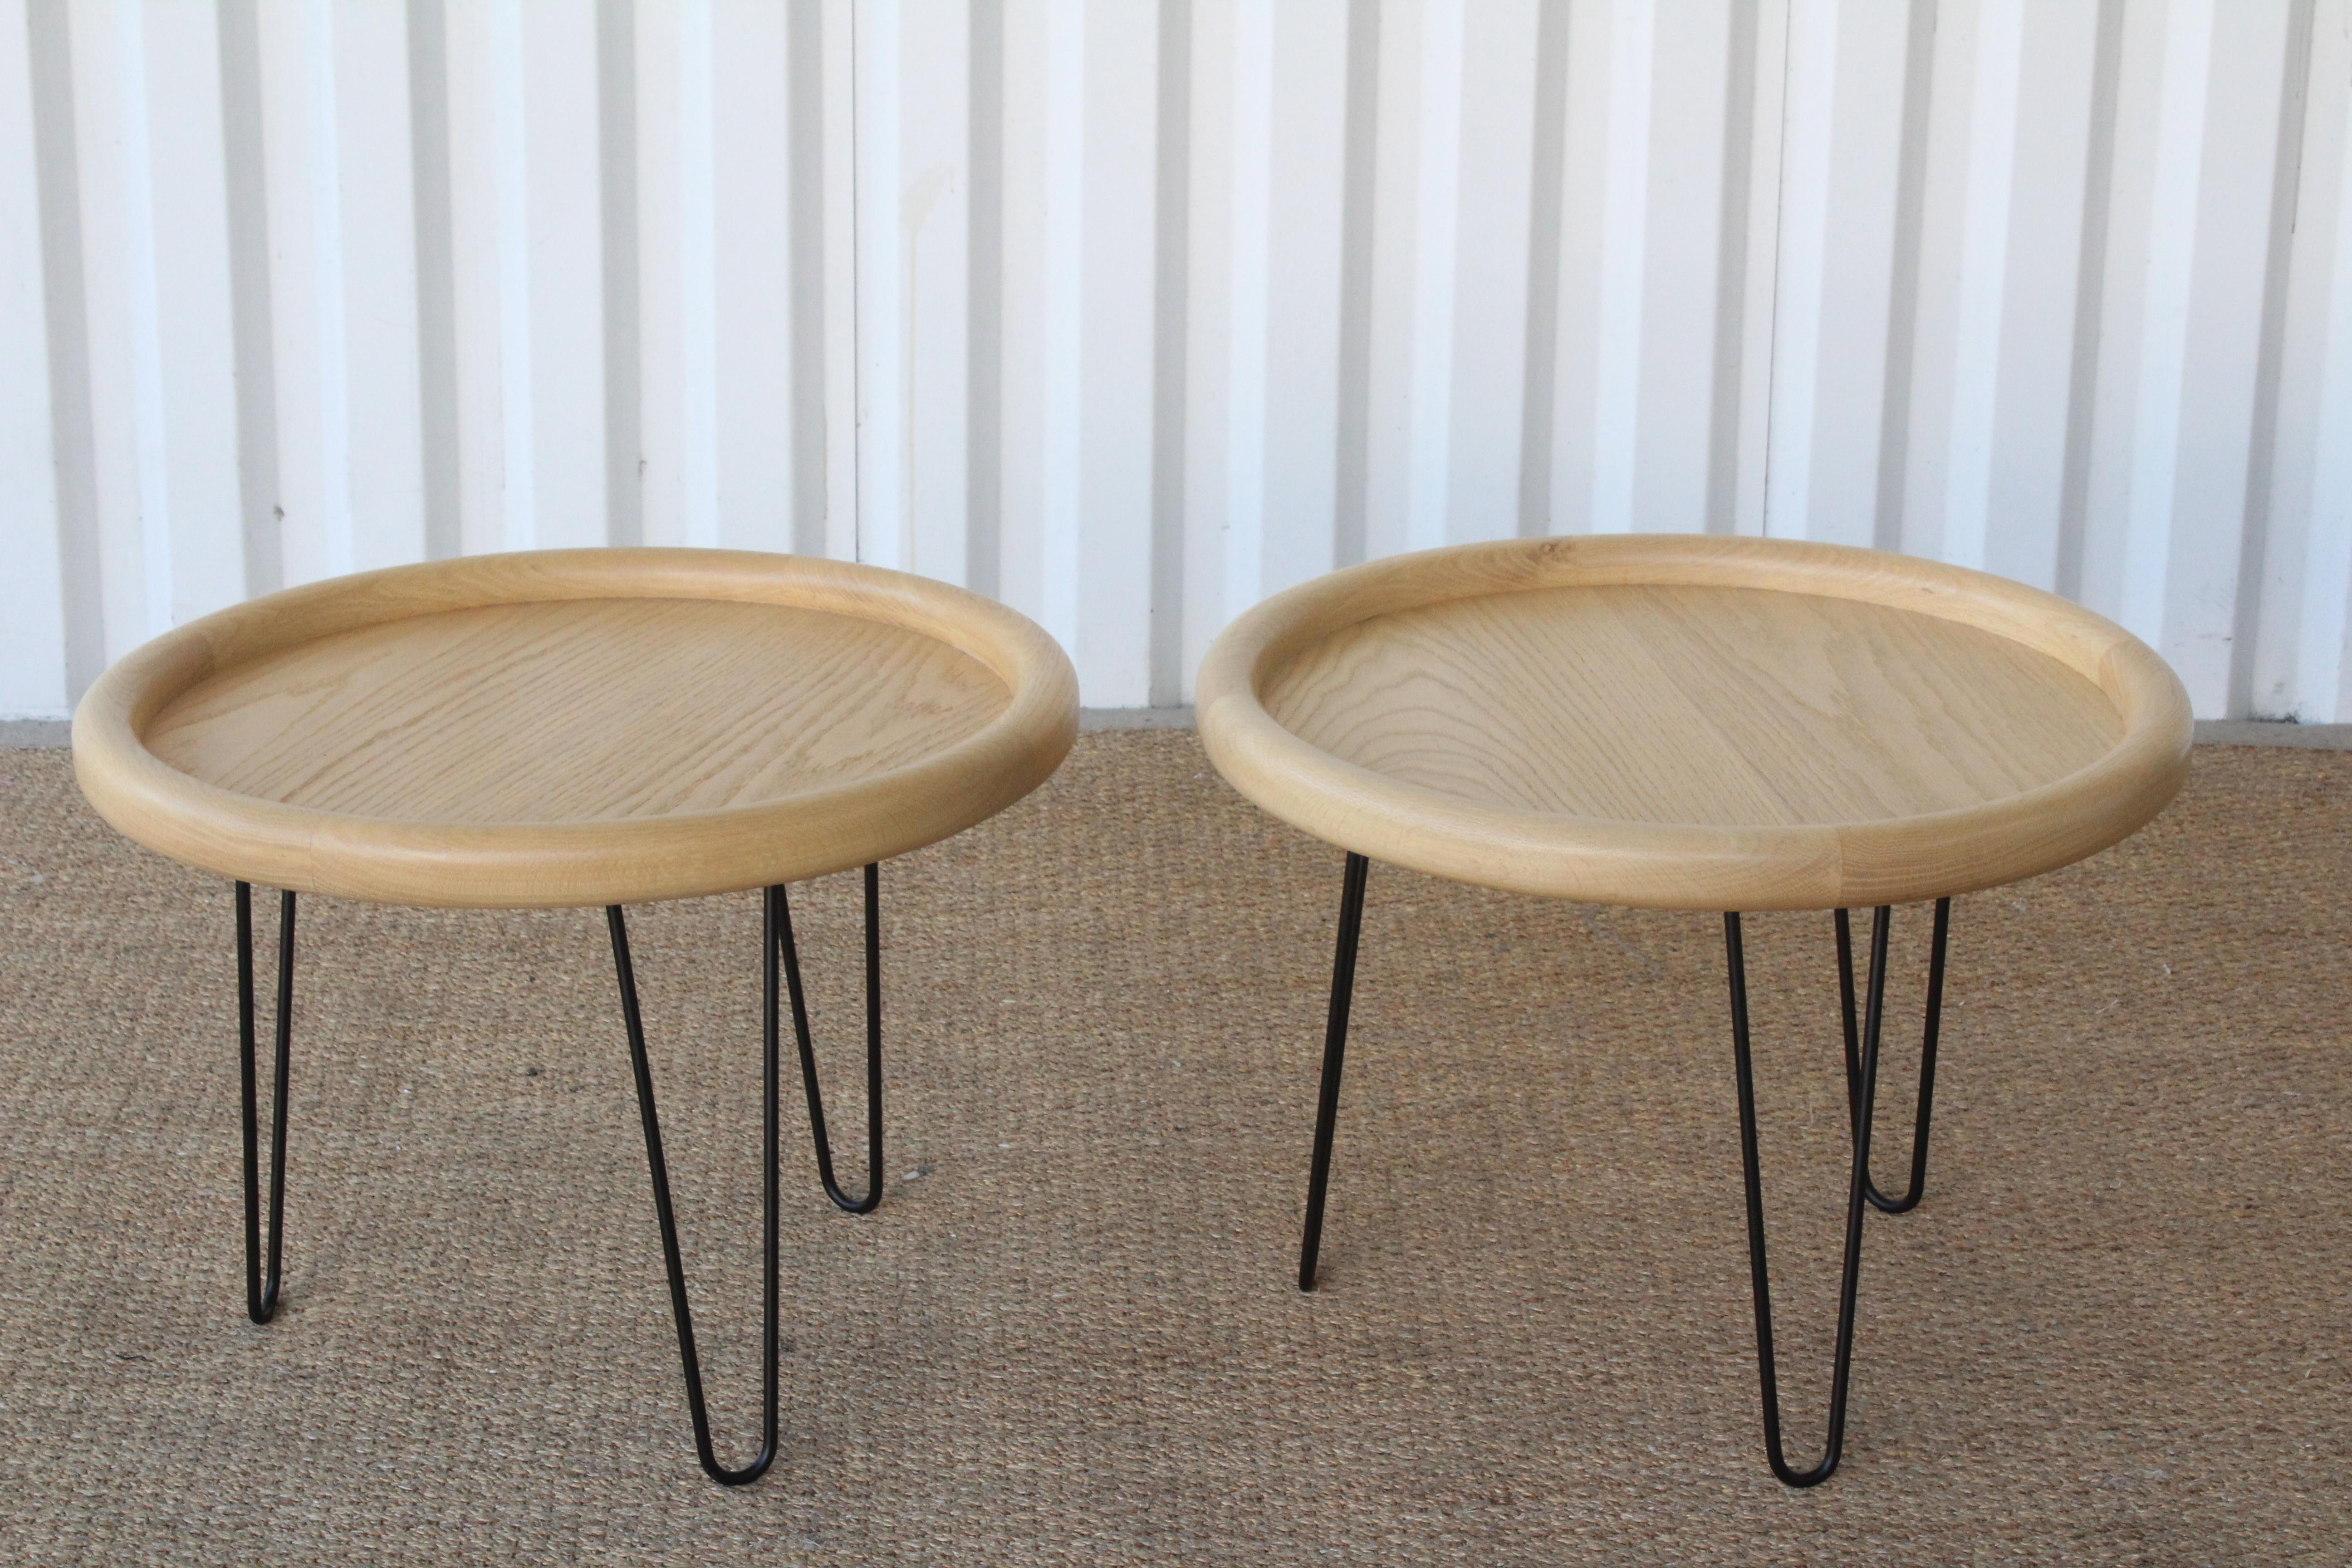 Custom mid-century style side or end tables, made of solid oak in a natural finish. Iron hairpin legs in a satin black powder coated finish. Sold individually.